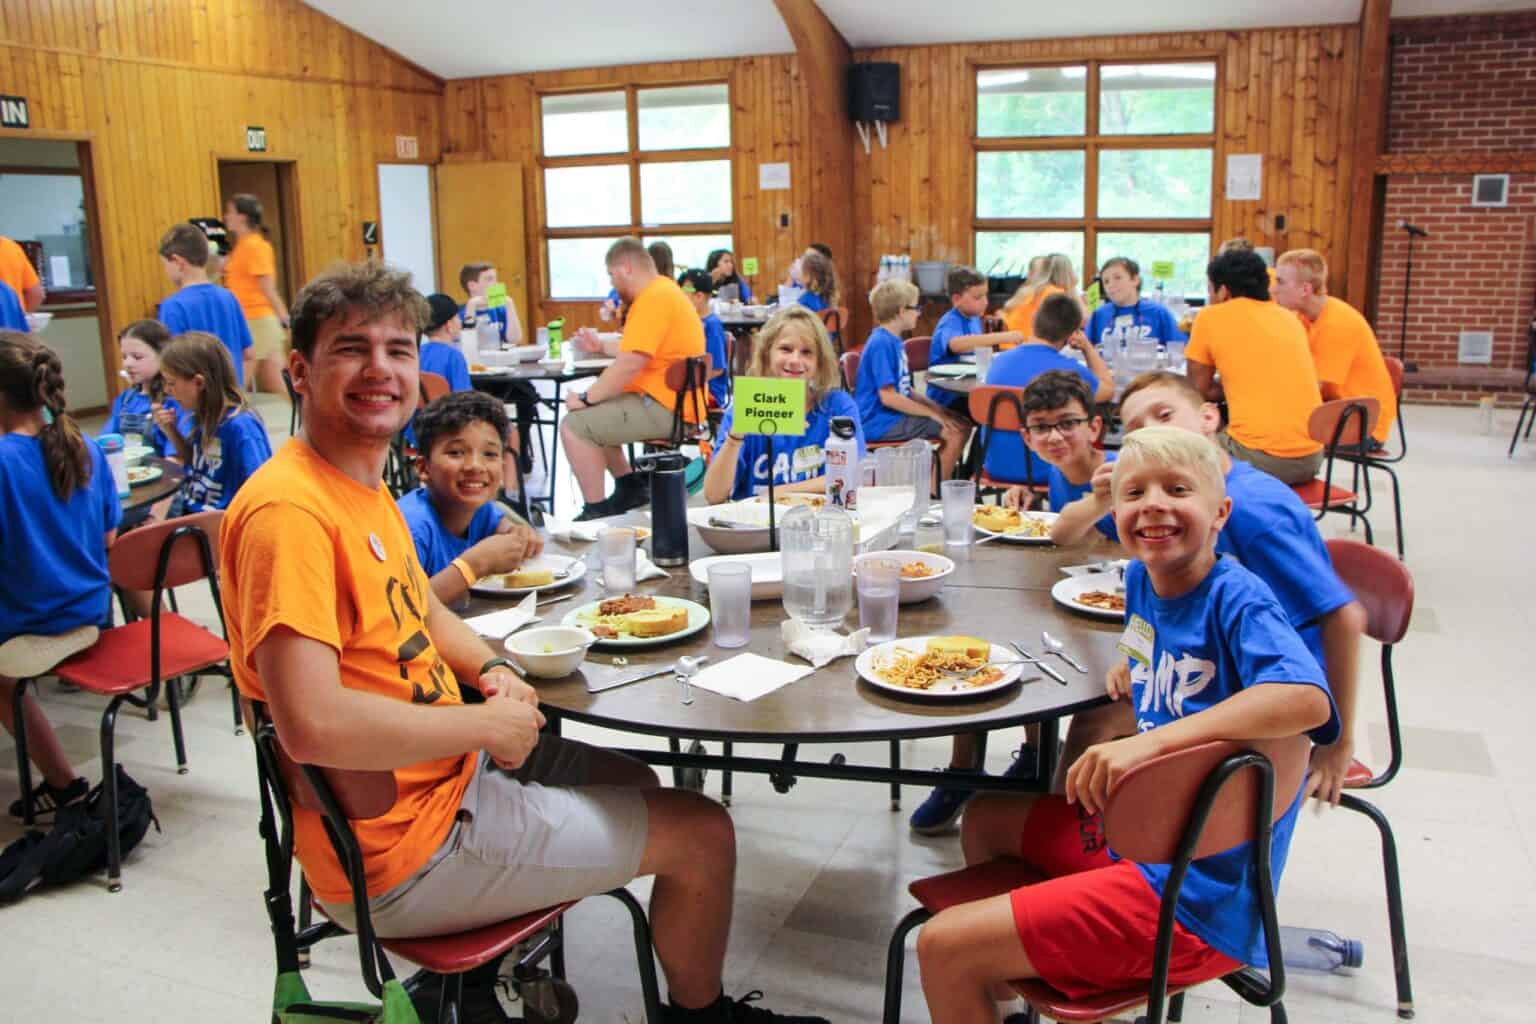 A group of kids eating at a table during summer camp in Iowa.